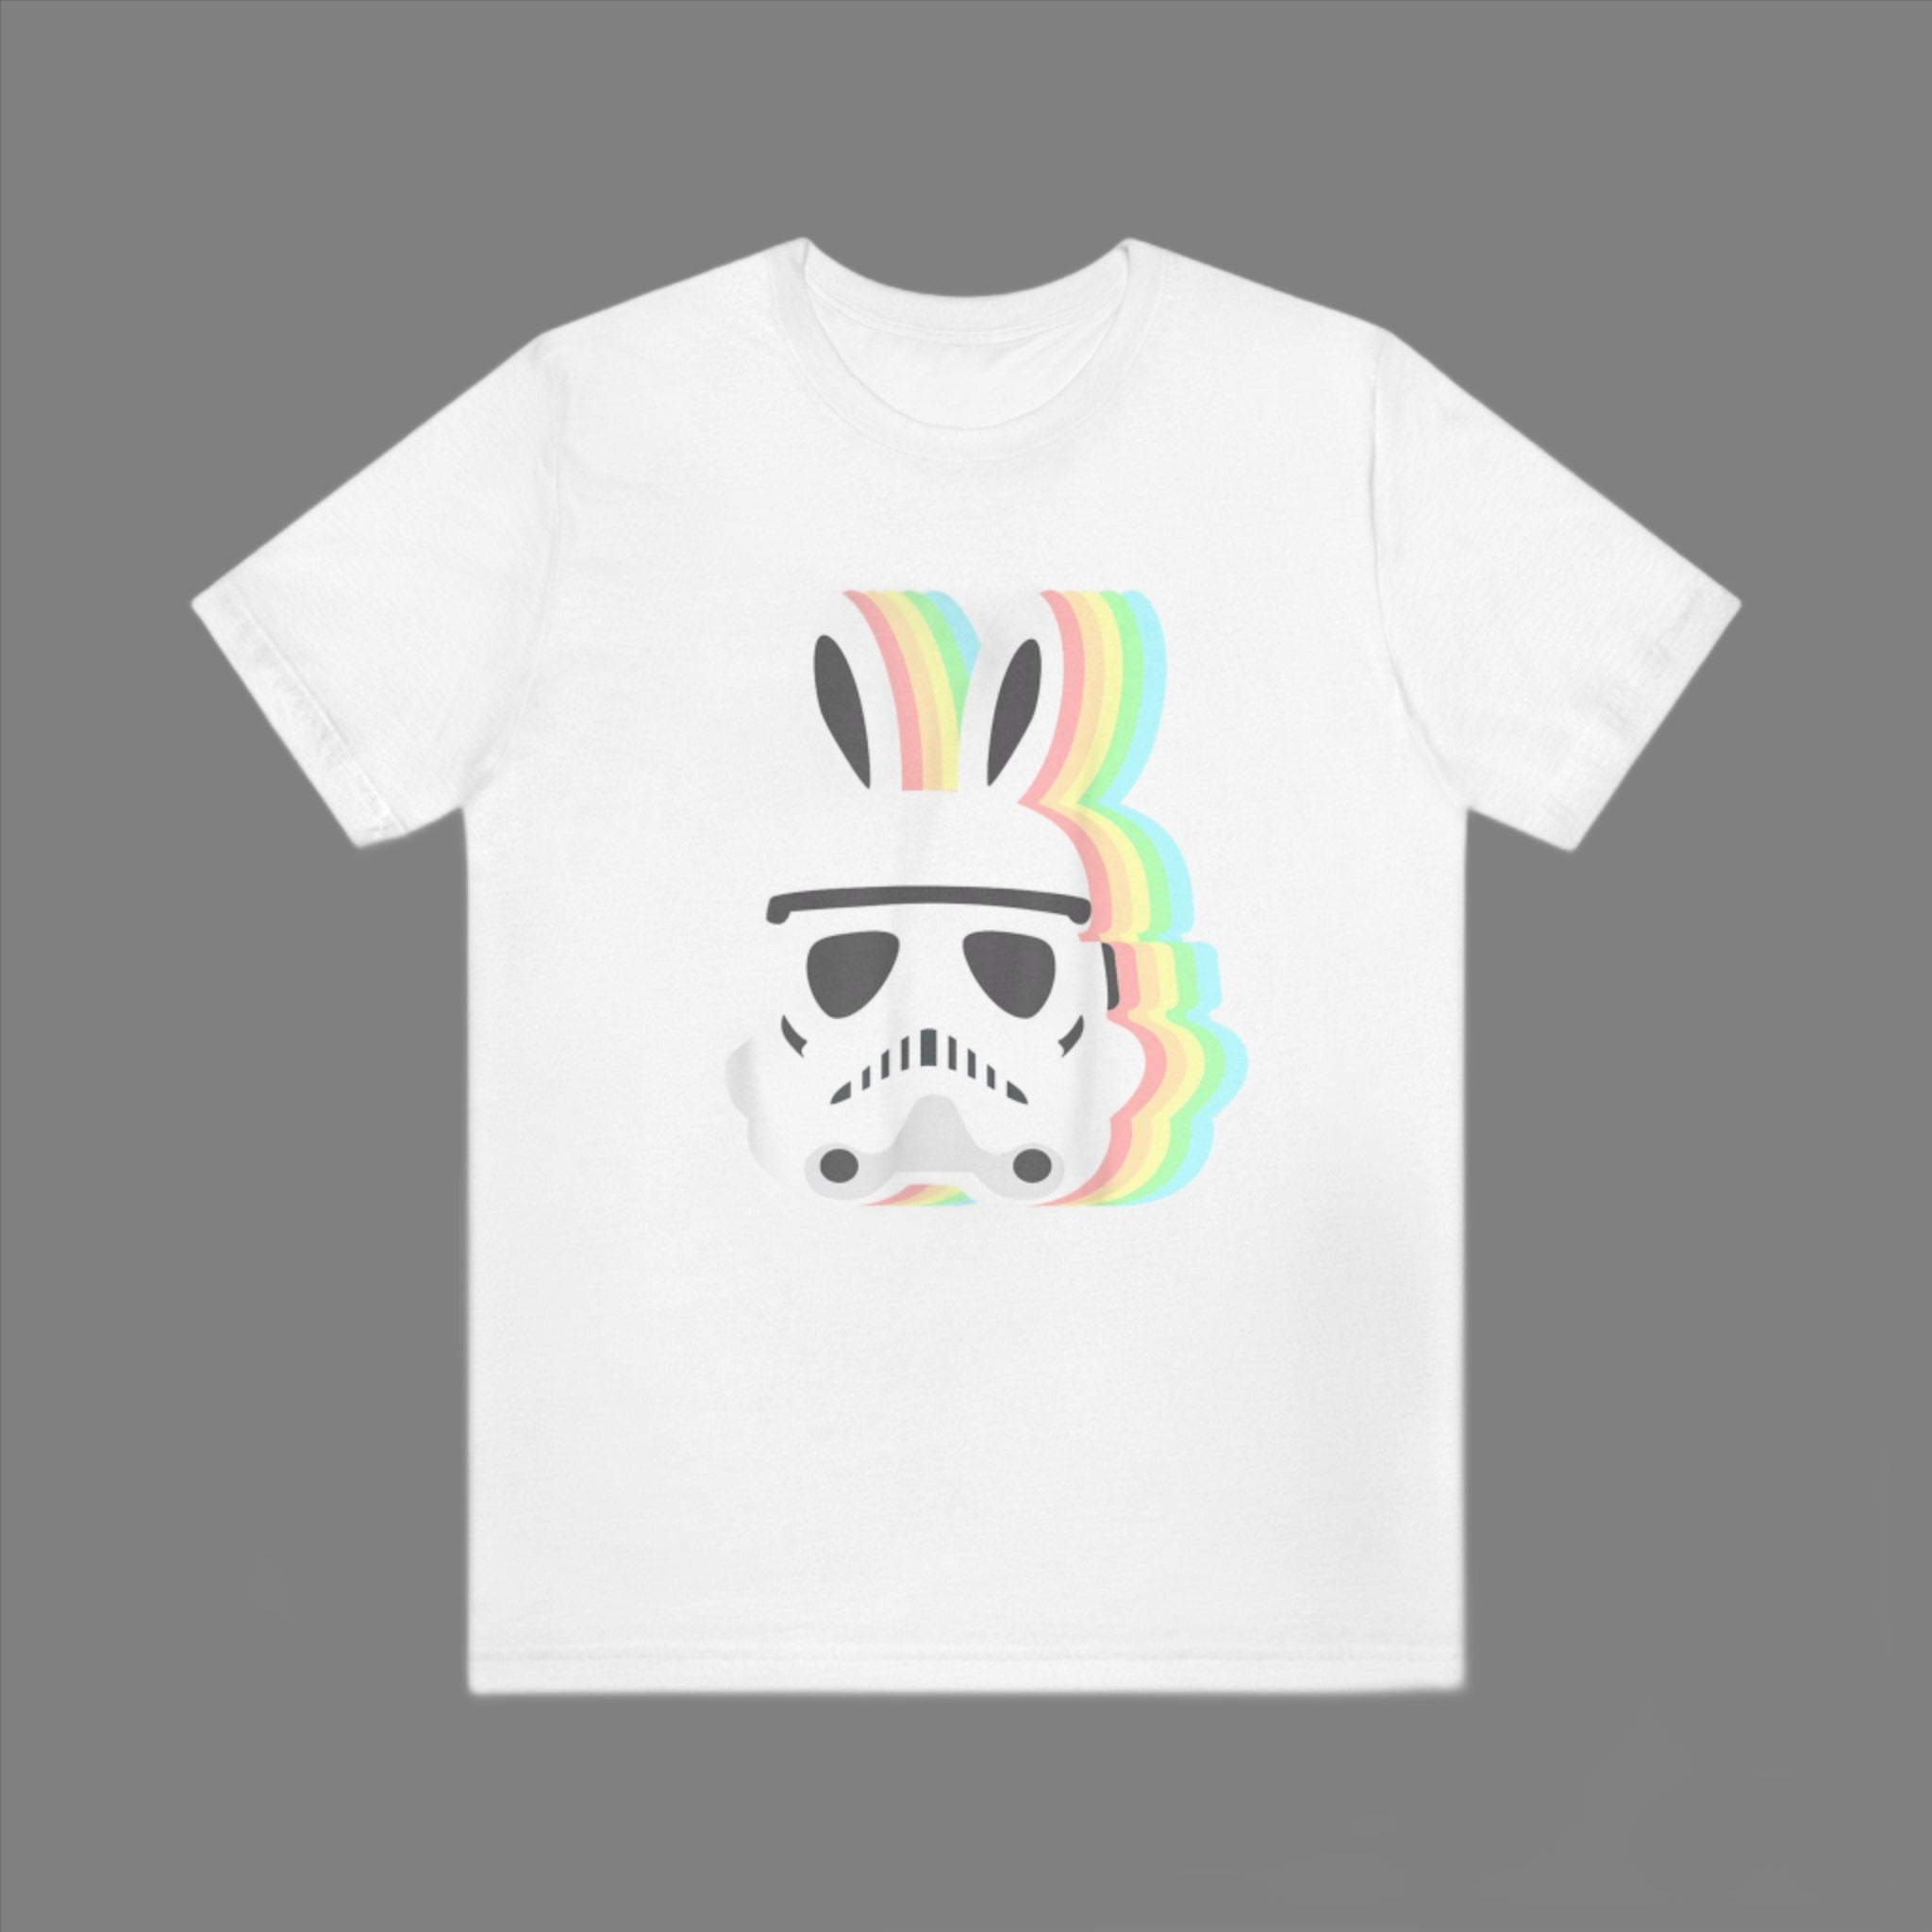 White tee featuring the Easter Stormtrooper Bunny design with colorful ears and rainbow trails.